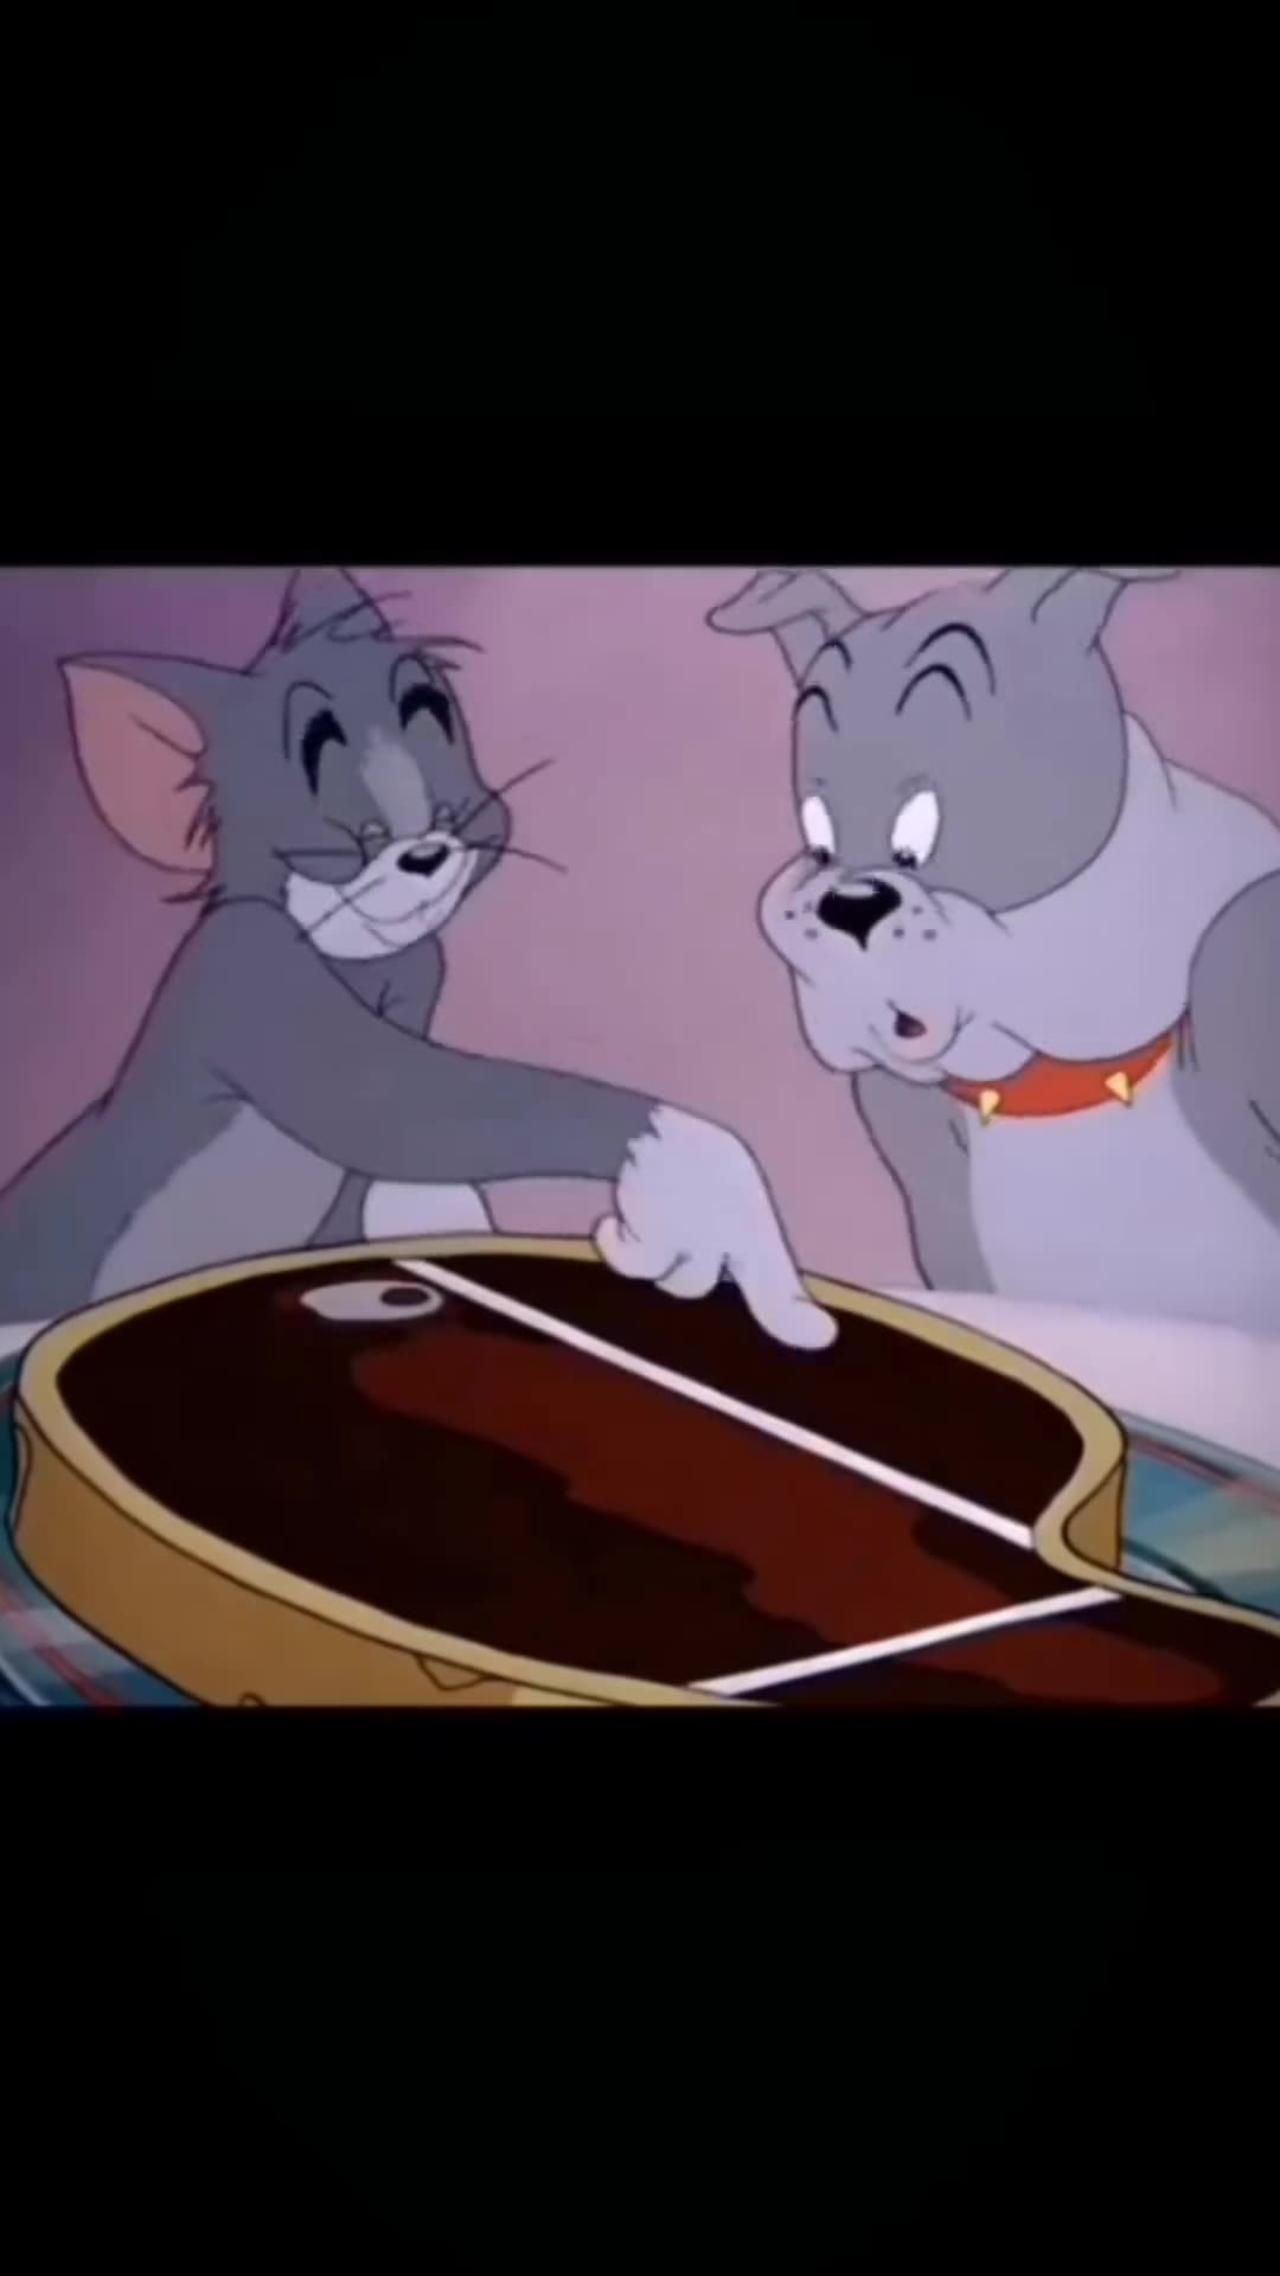 Tom and jerry fight clup 3 🤭😻